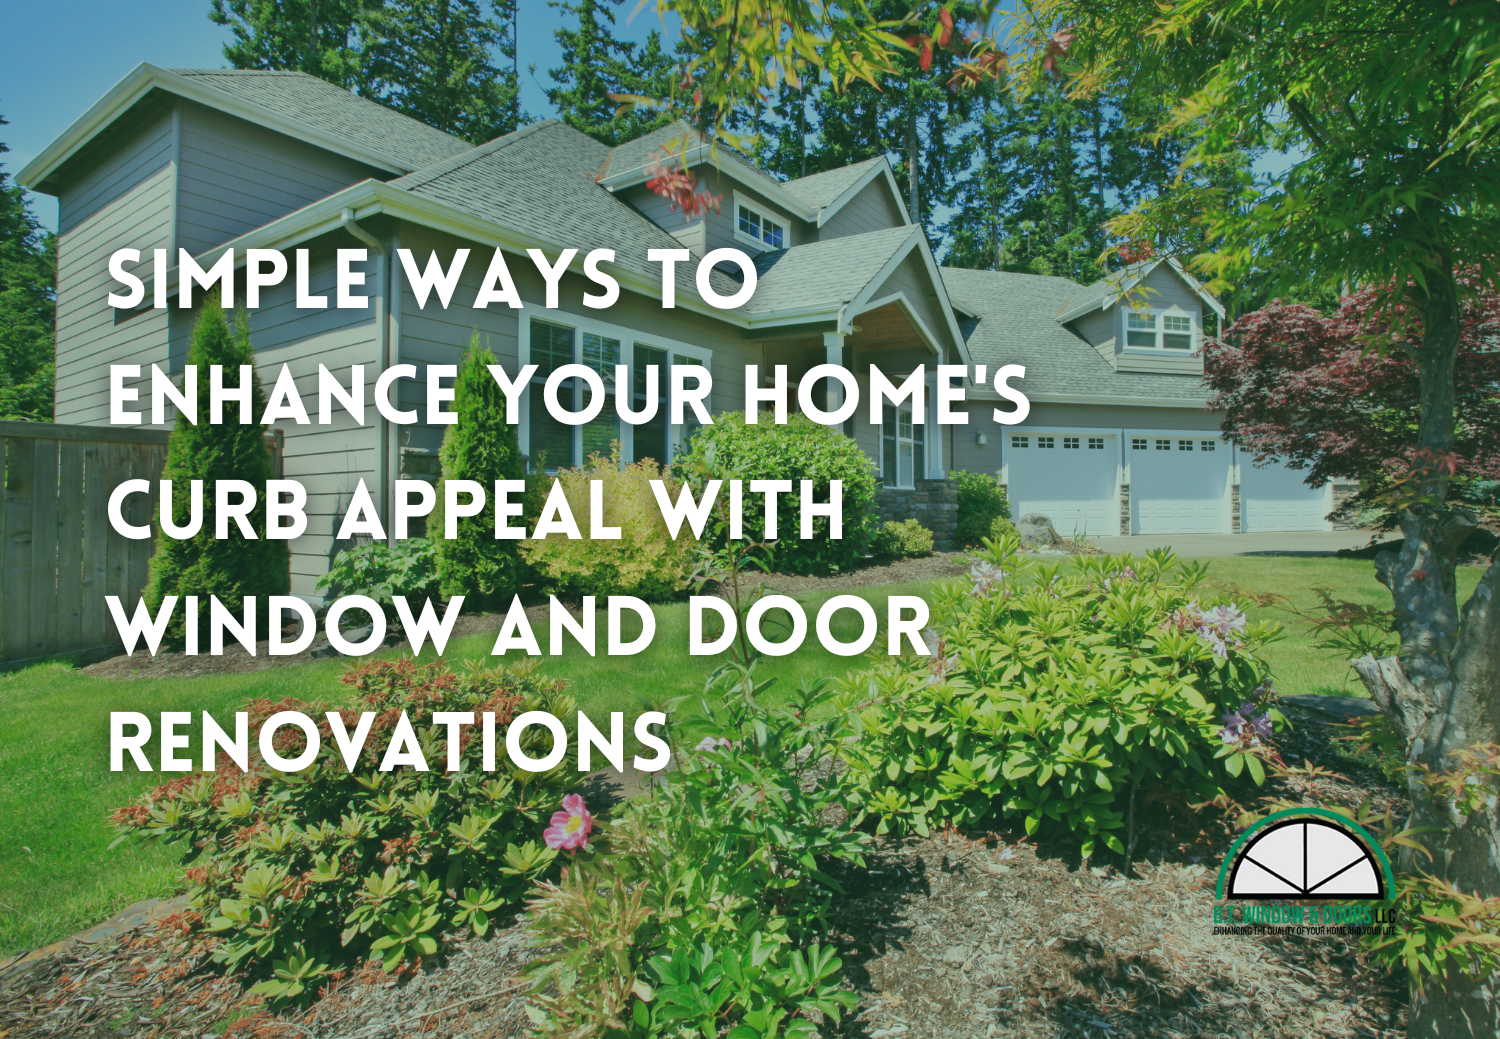 Simple Ways to Enhance Your Home's Curb Appeal with Window and Door Renovations